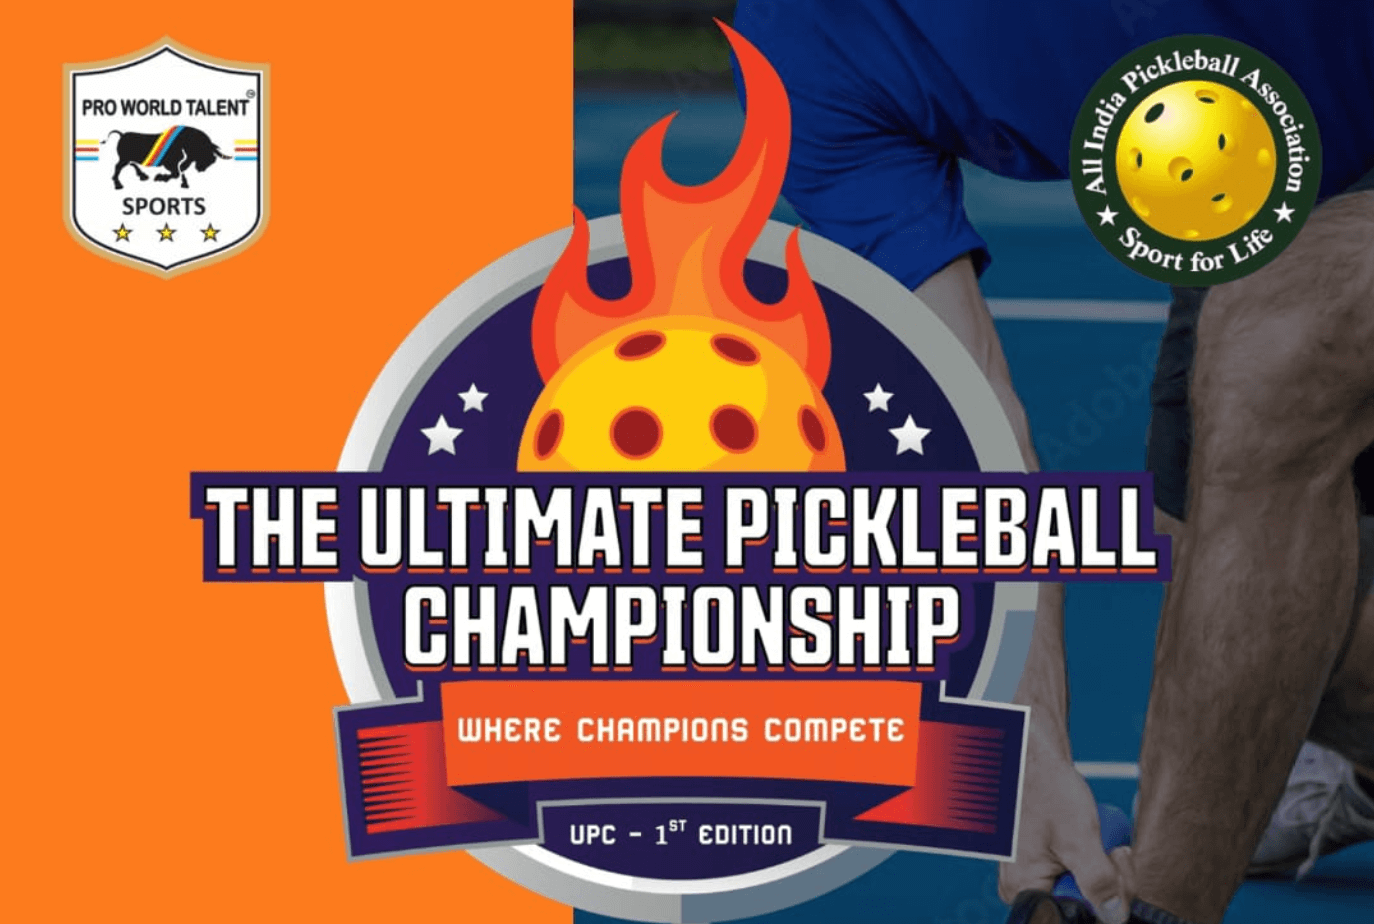 What is the Ultimate Pickleball Championships?